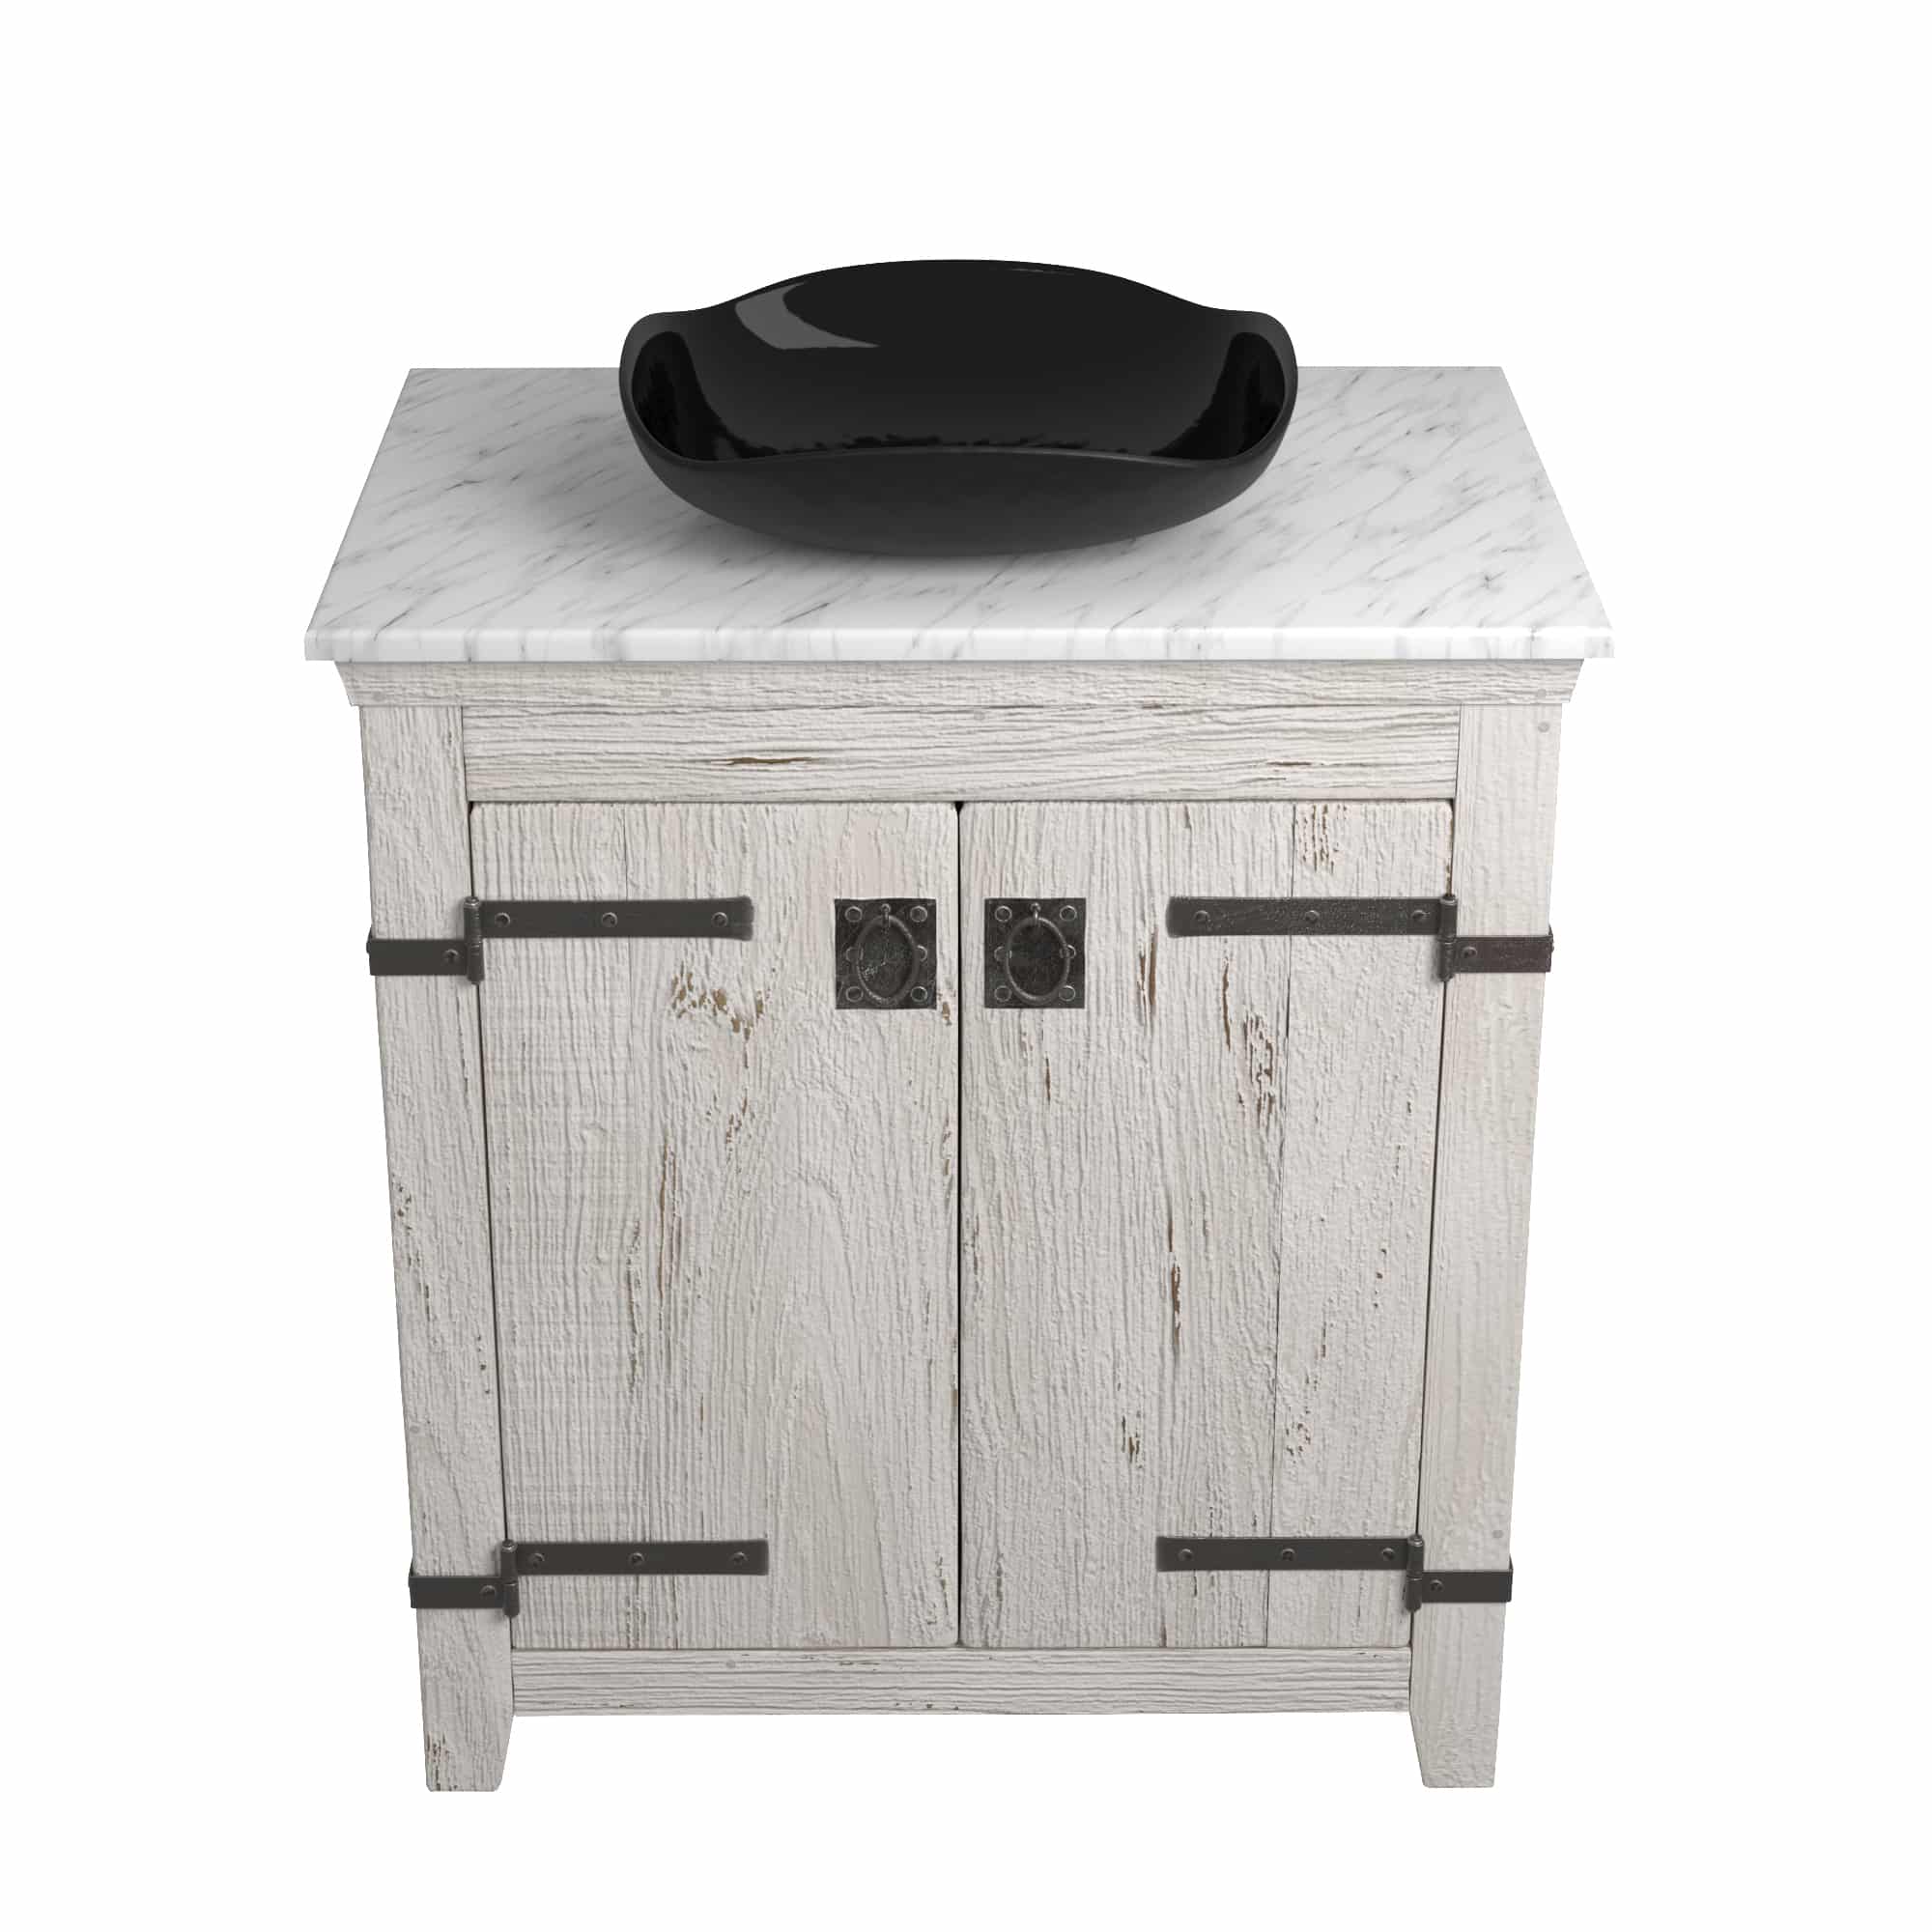 Native Trails 30" Americana Vanity in Whitewash with Carrara Marble Top and Lido in Abyss, No Faucet Hole, BND30-VB-CT-MG-010